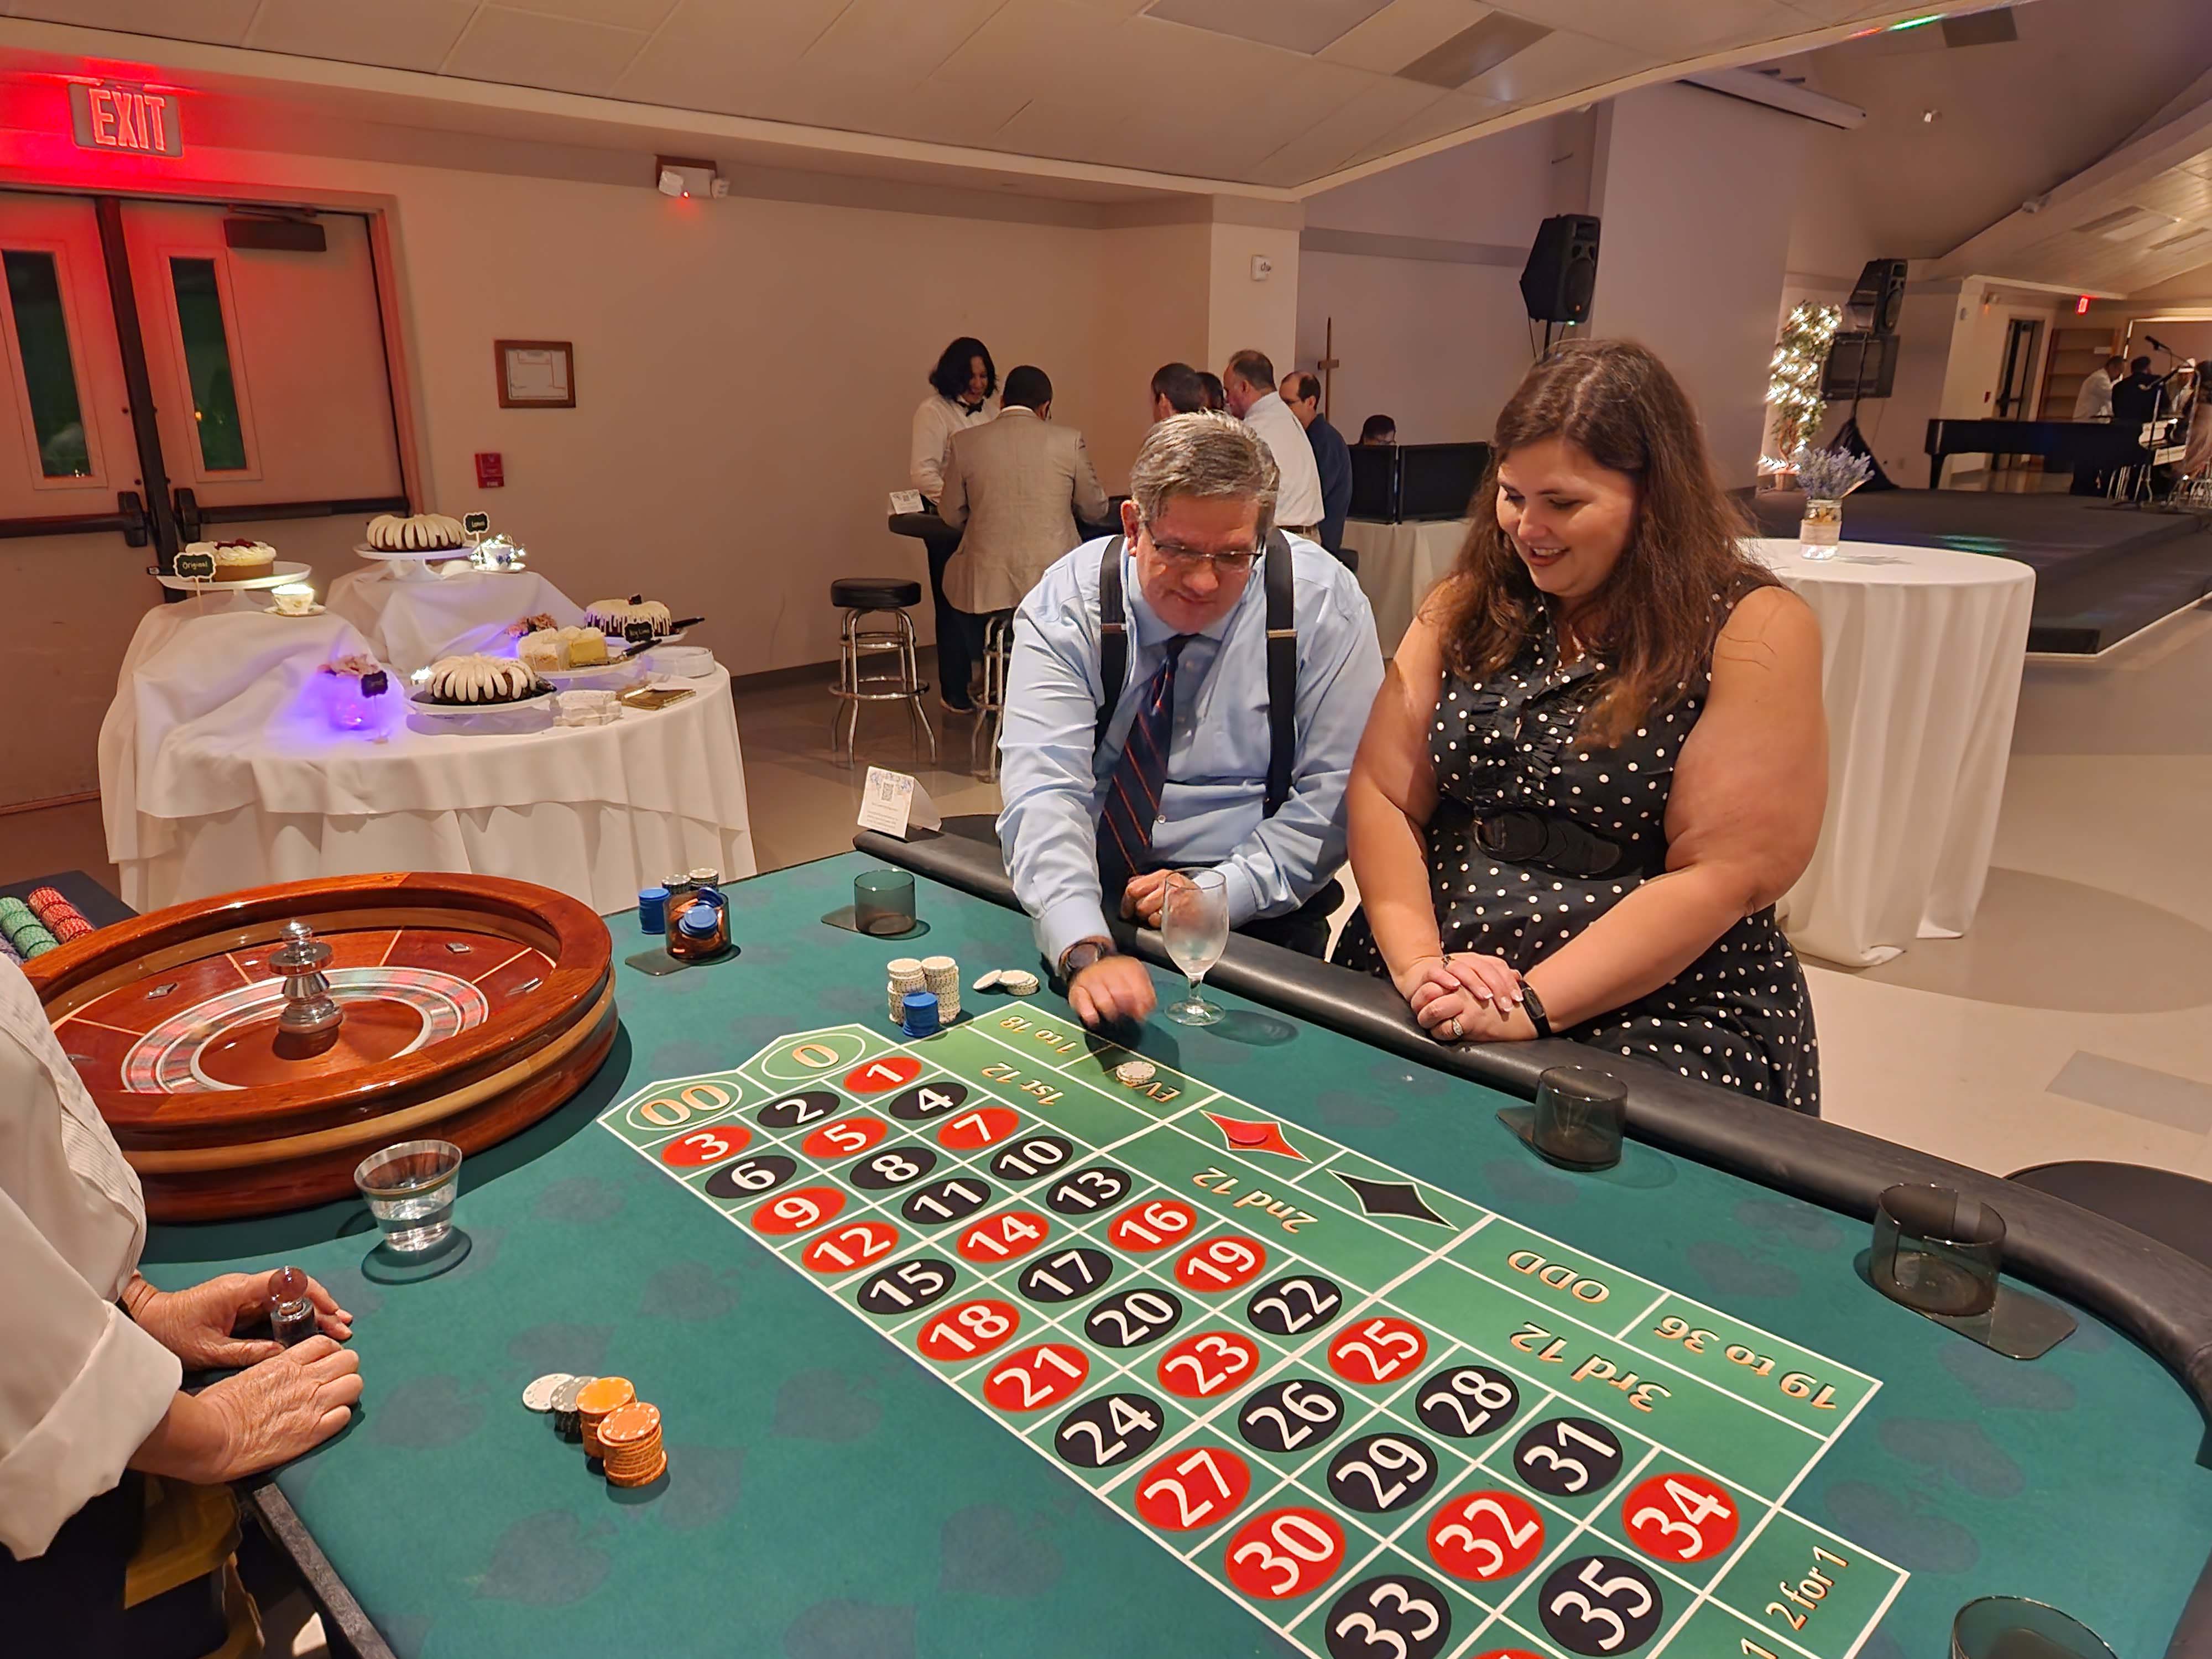 Roulette table with players and dealers at a Fundraiser.